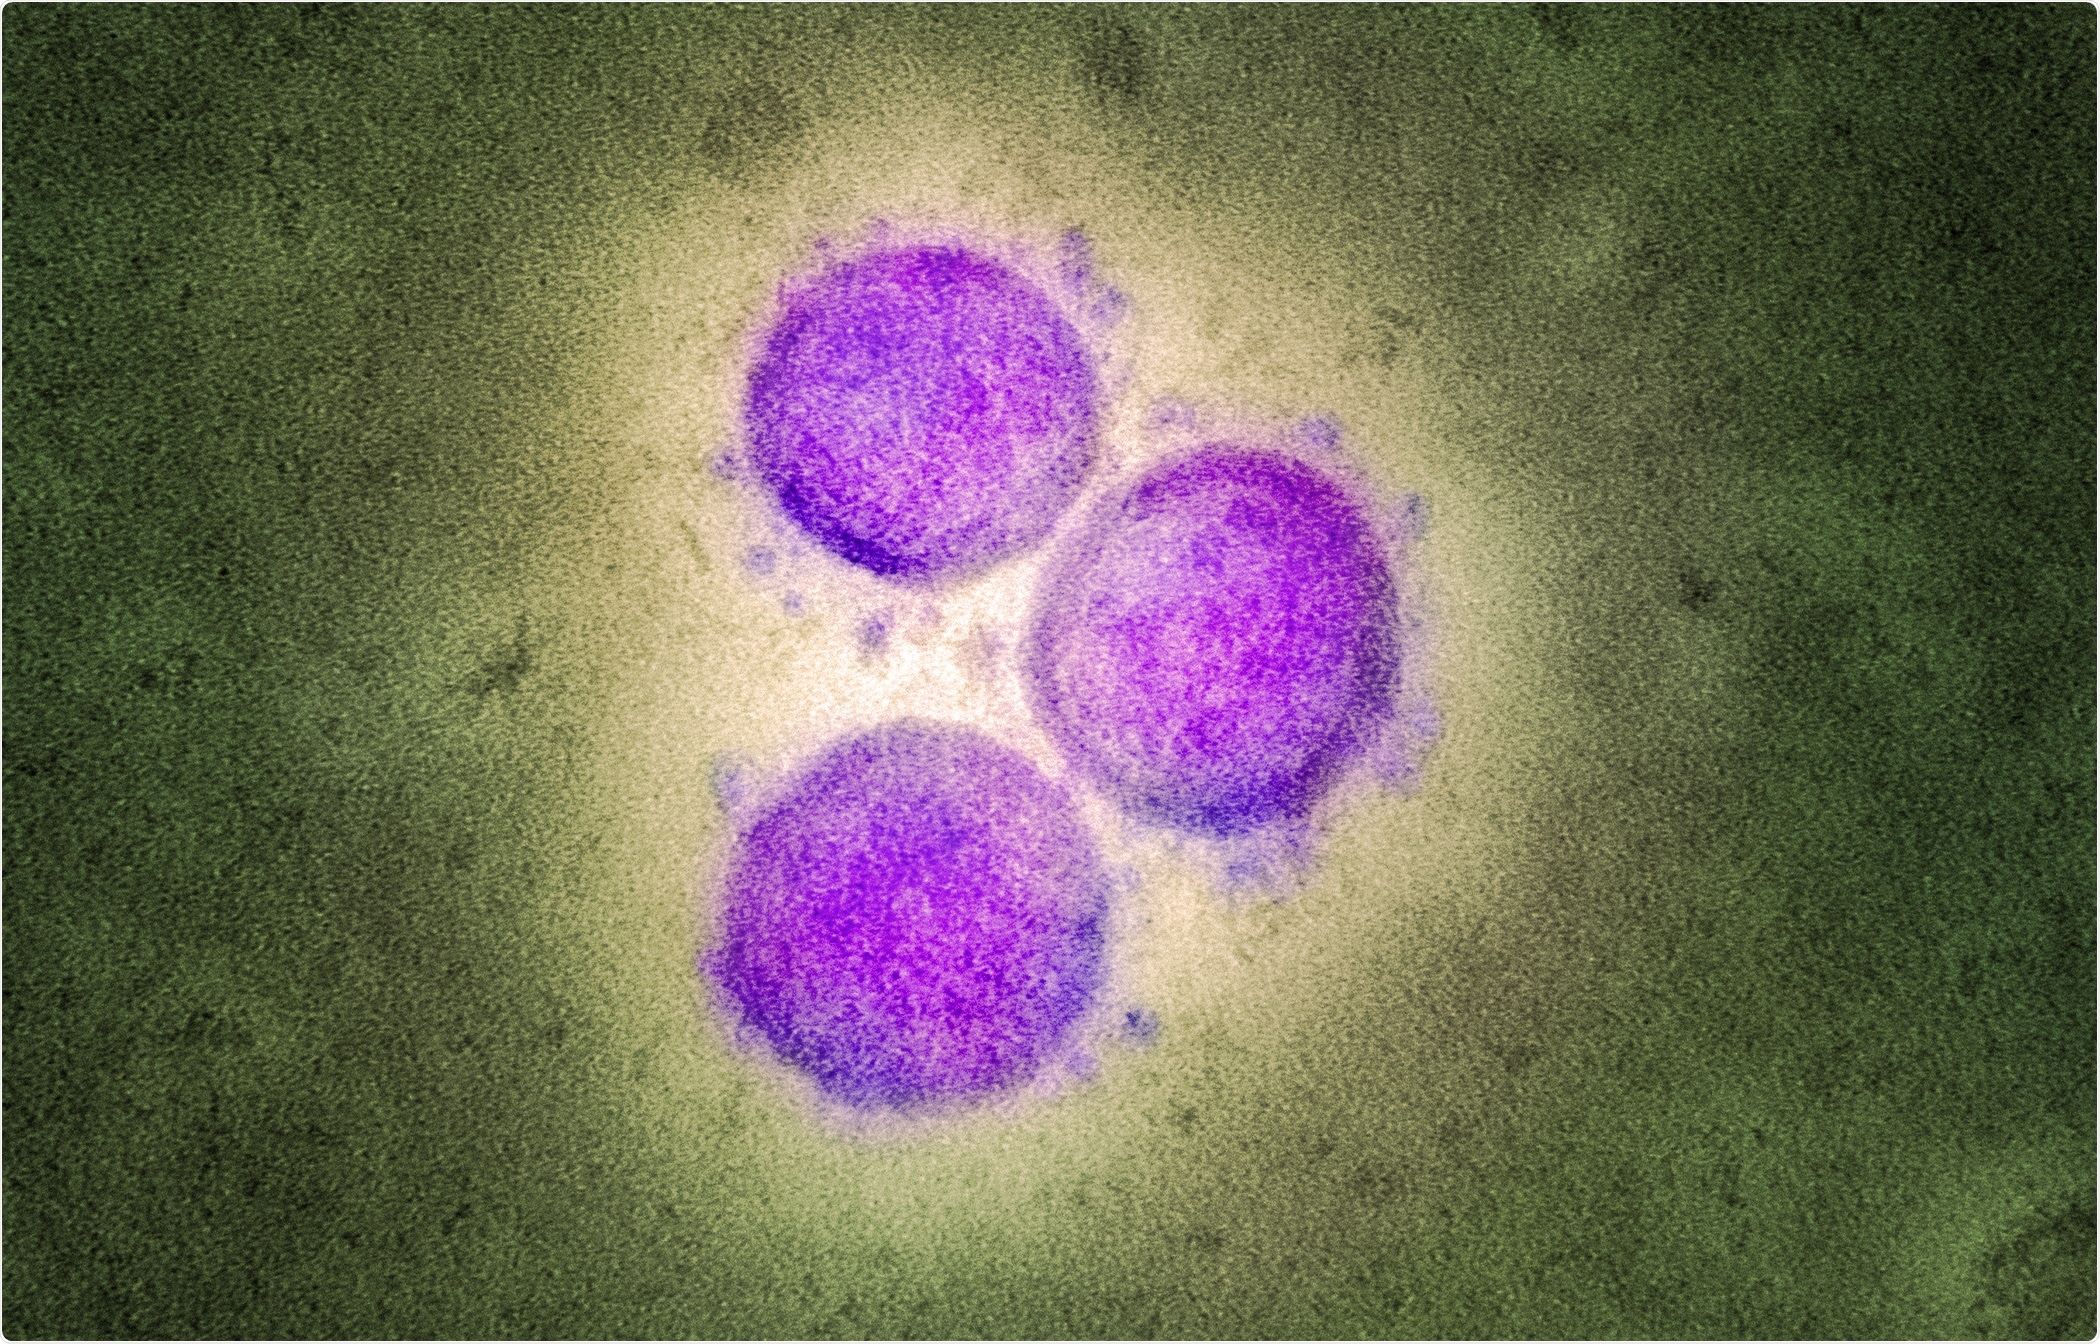 Transmission electron micrograph of SARS-CoV-2 virus particles (UK B.1.1.7 variant), isolated from a patient sample and cultivated in cell culture. Image captured at the NIAID Integrated Research Facility (IRF) in Fort Detrick, Maryland. Credit: NIAID